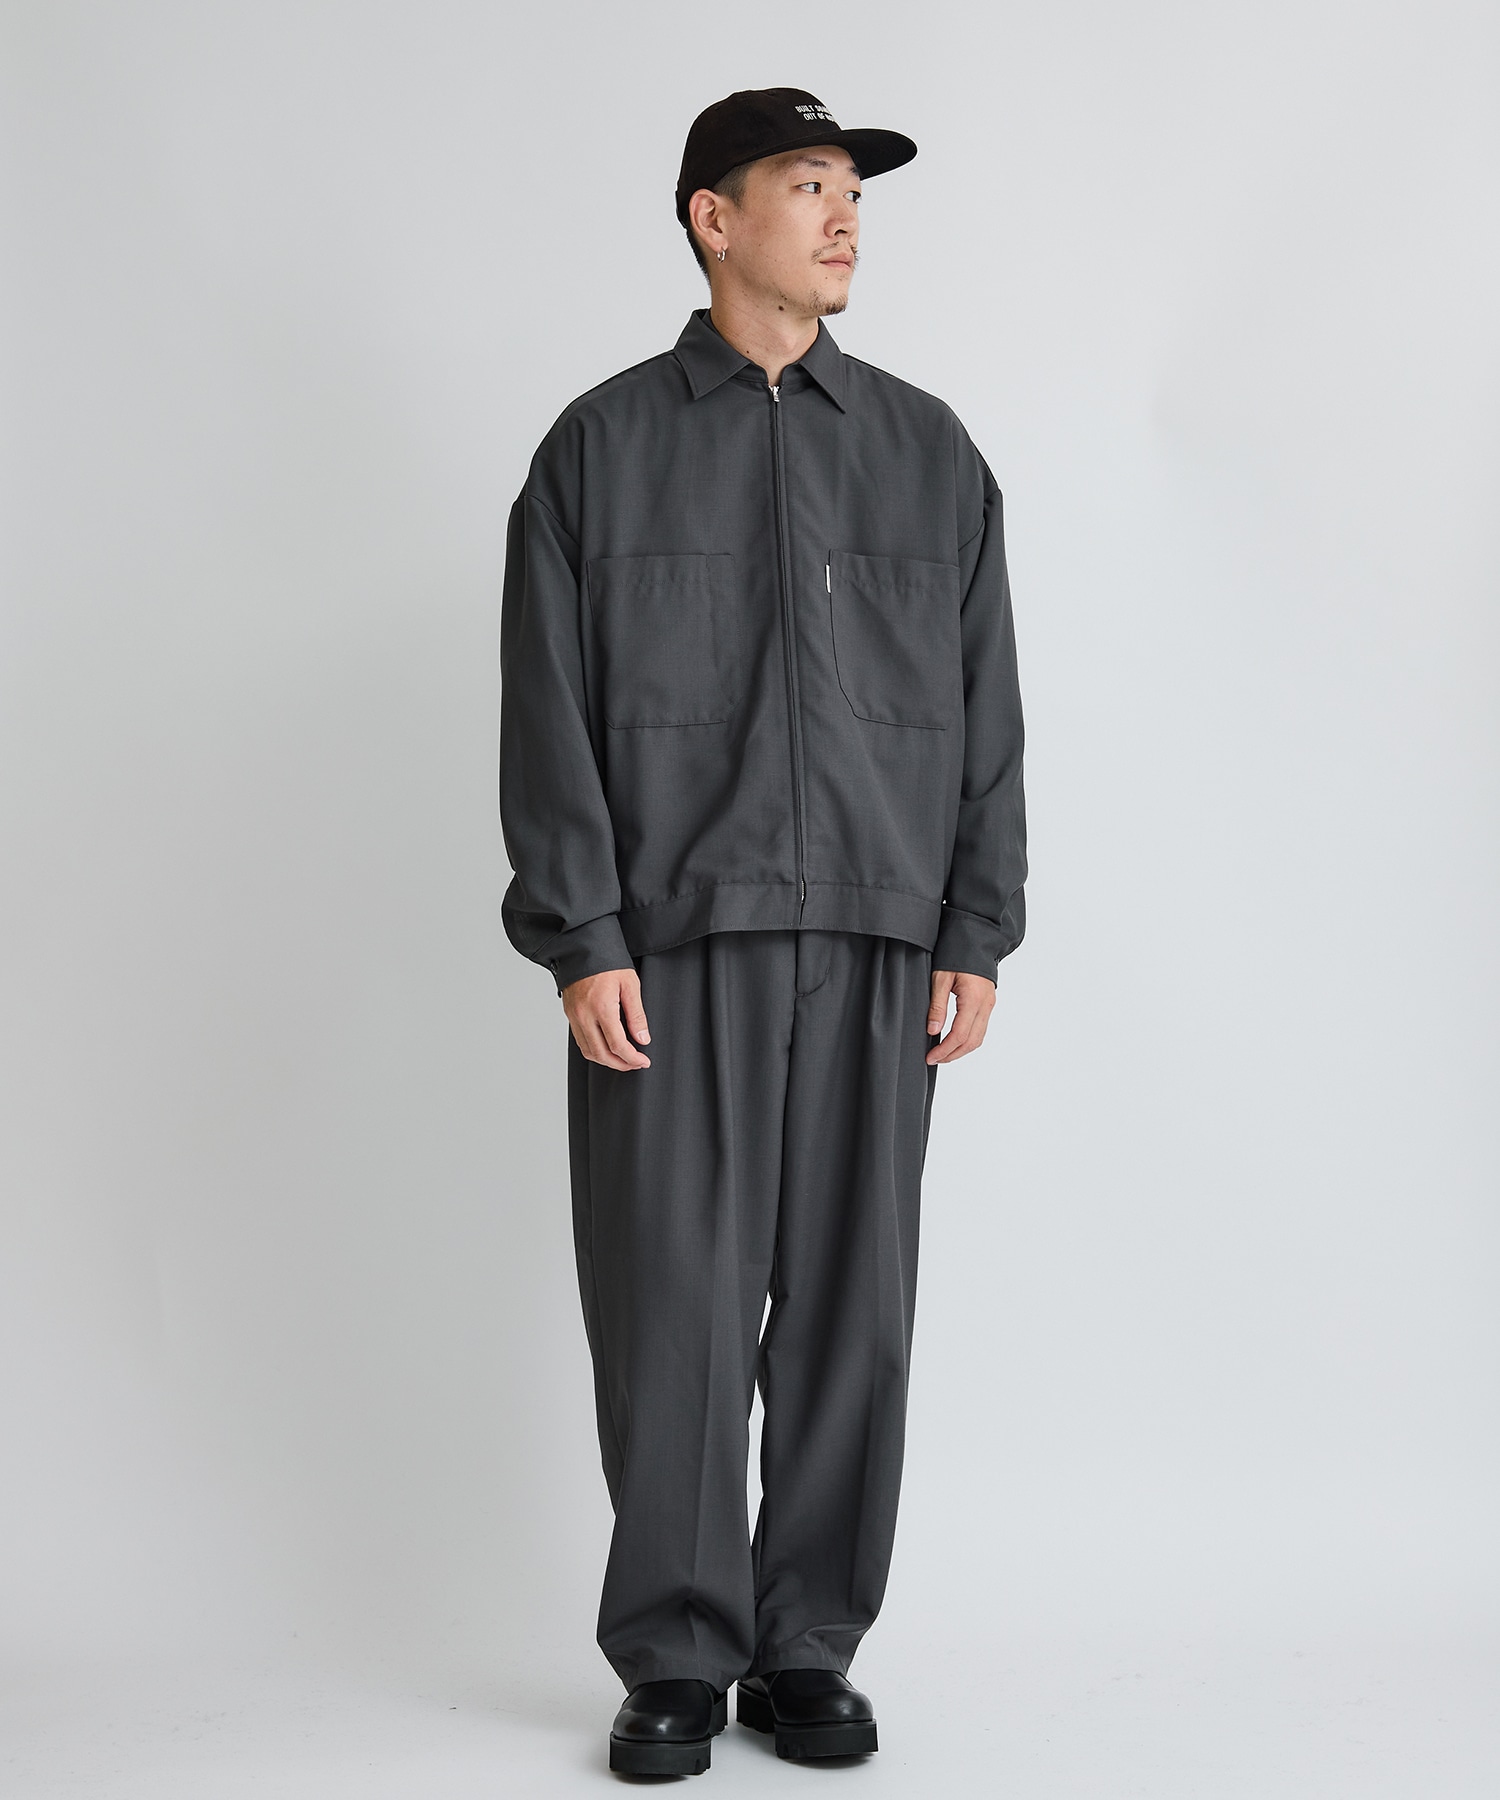 T/W Work Jacket | COOTIE PRODUCTIONS